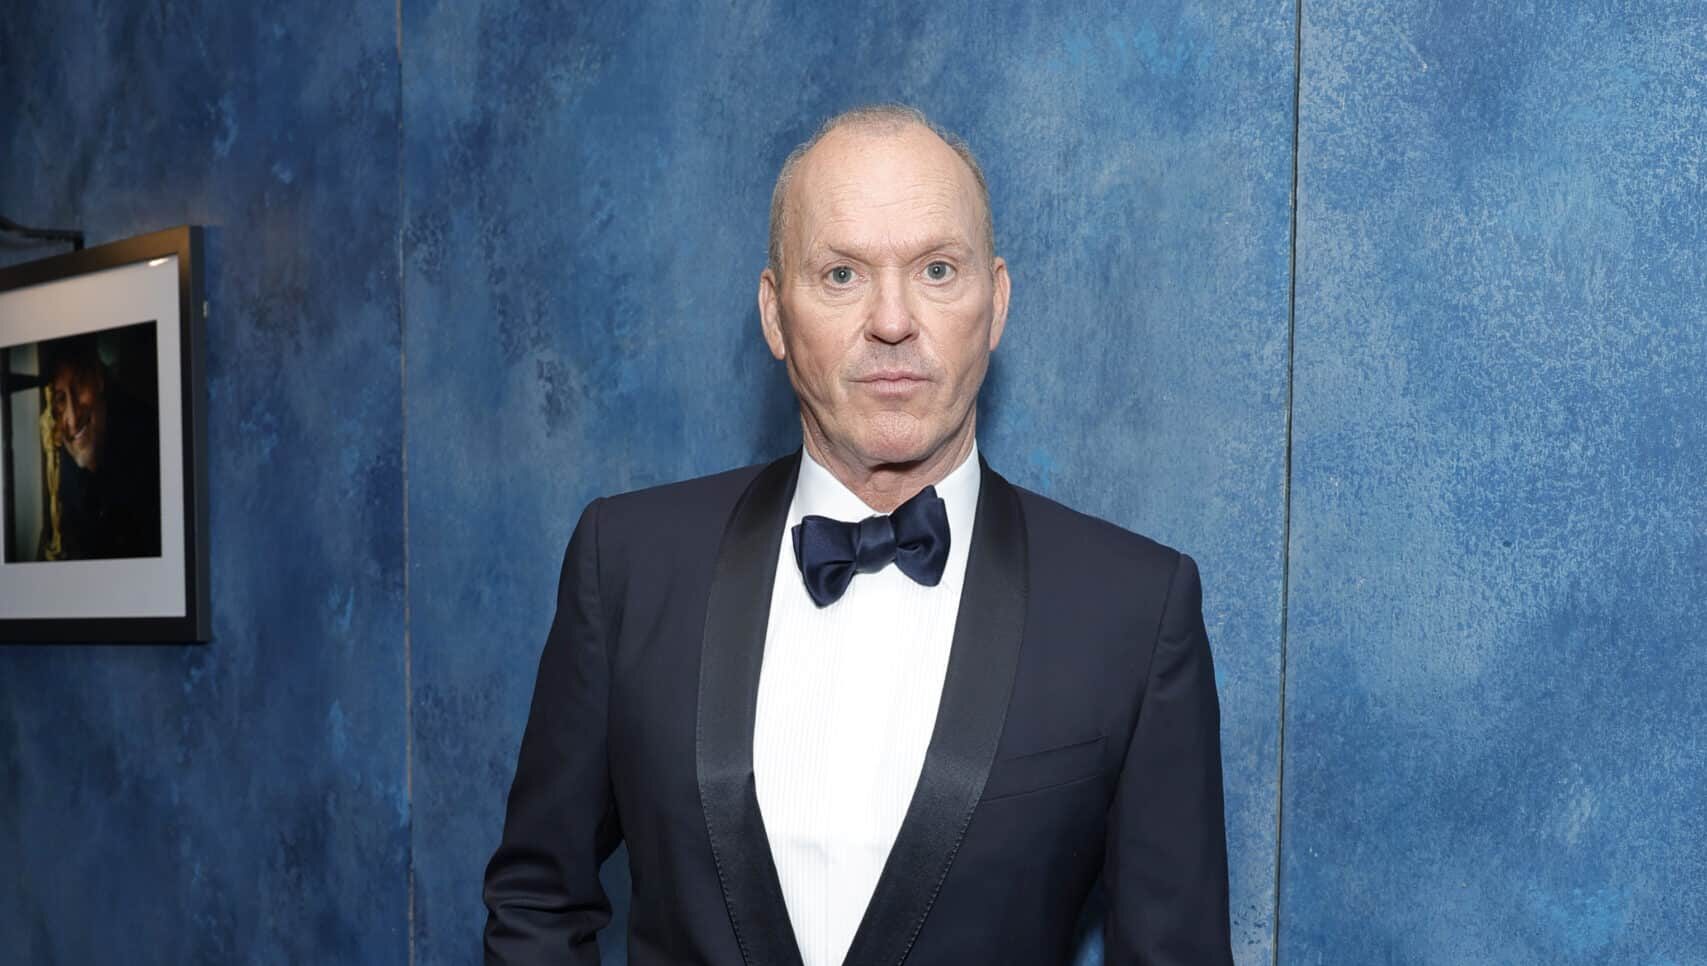 BEVERLY HILLS, CALIFORNIA - MARCH 12: EXCLUSIVE ACCESS, SPECIAL RATES APPLY. Michael Keaton attends the 2023 Vanity Fair Oscar Party Hosted By Radhika Jones at Wallis Annenberg Center for the Performing Arts on March 12, 2023 in Beverly Hills, California.